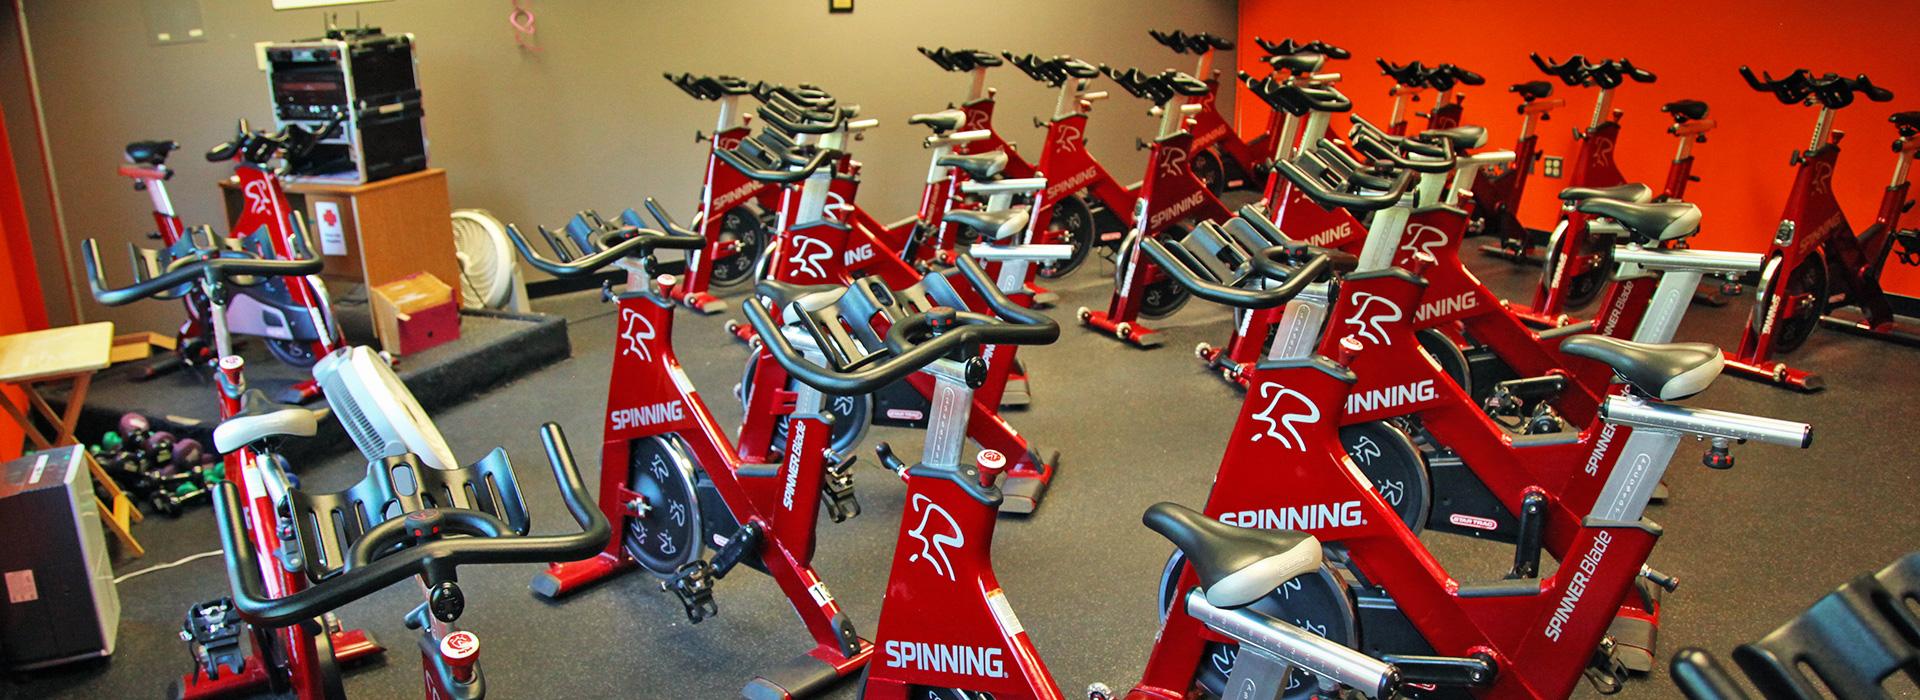 Taylor Bend Family YMCA Group cycling Room